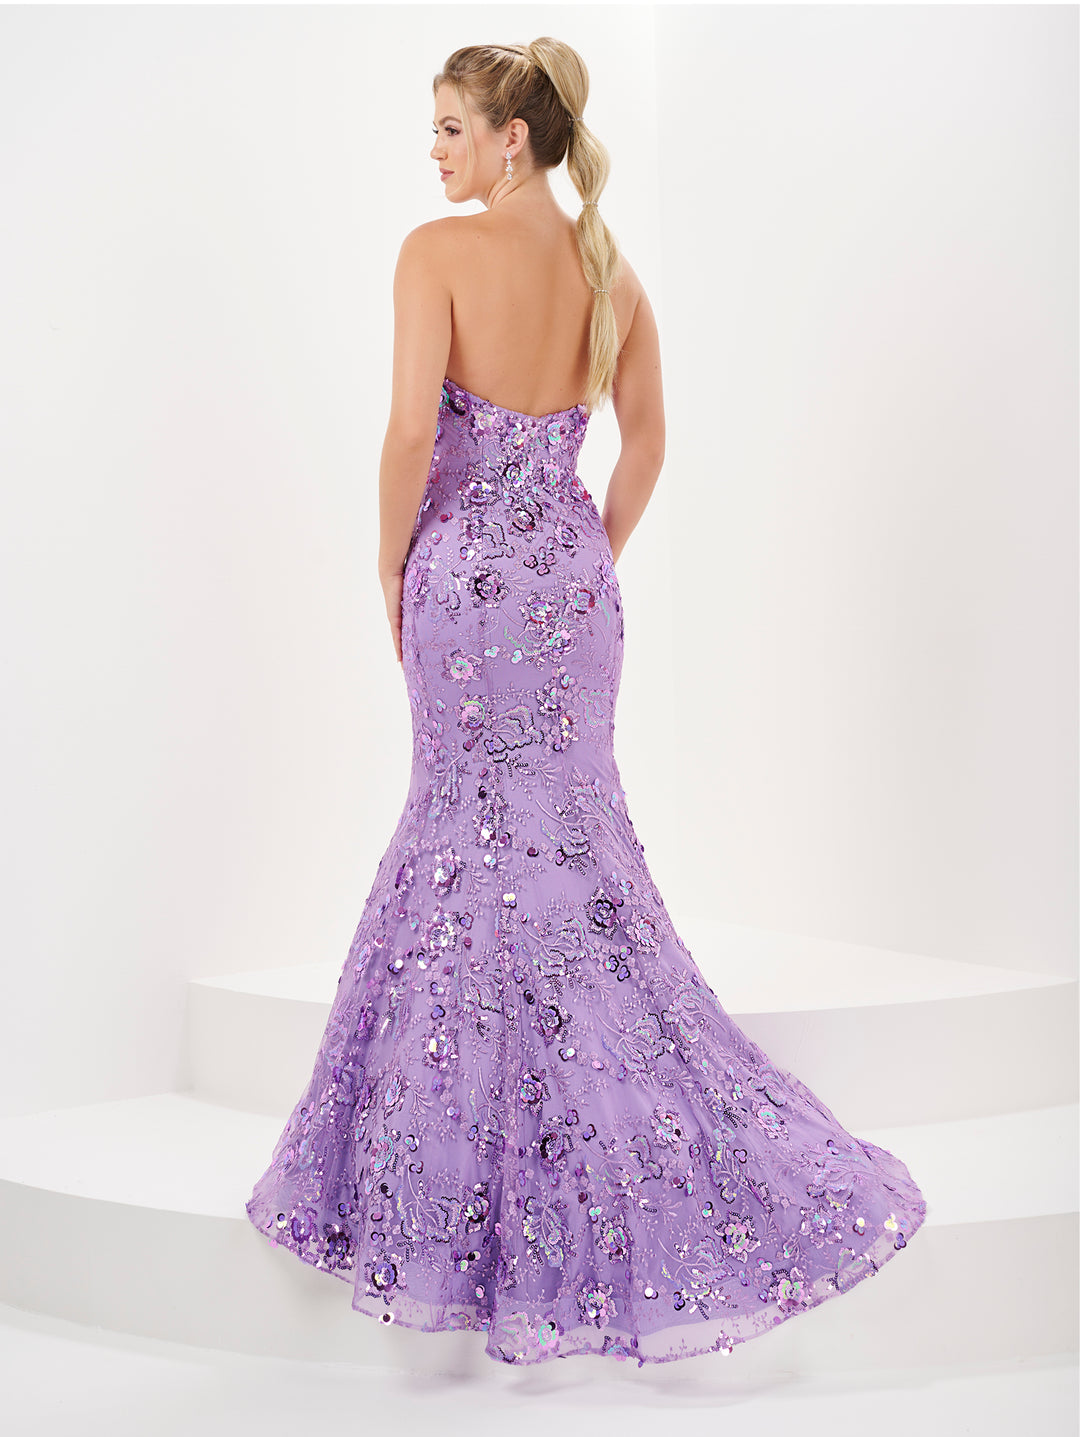 Sequin Applique Strapless Mermaid Dress by Tiffany Designs 16052